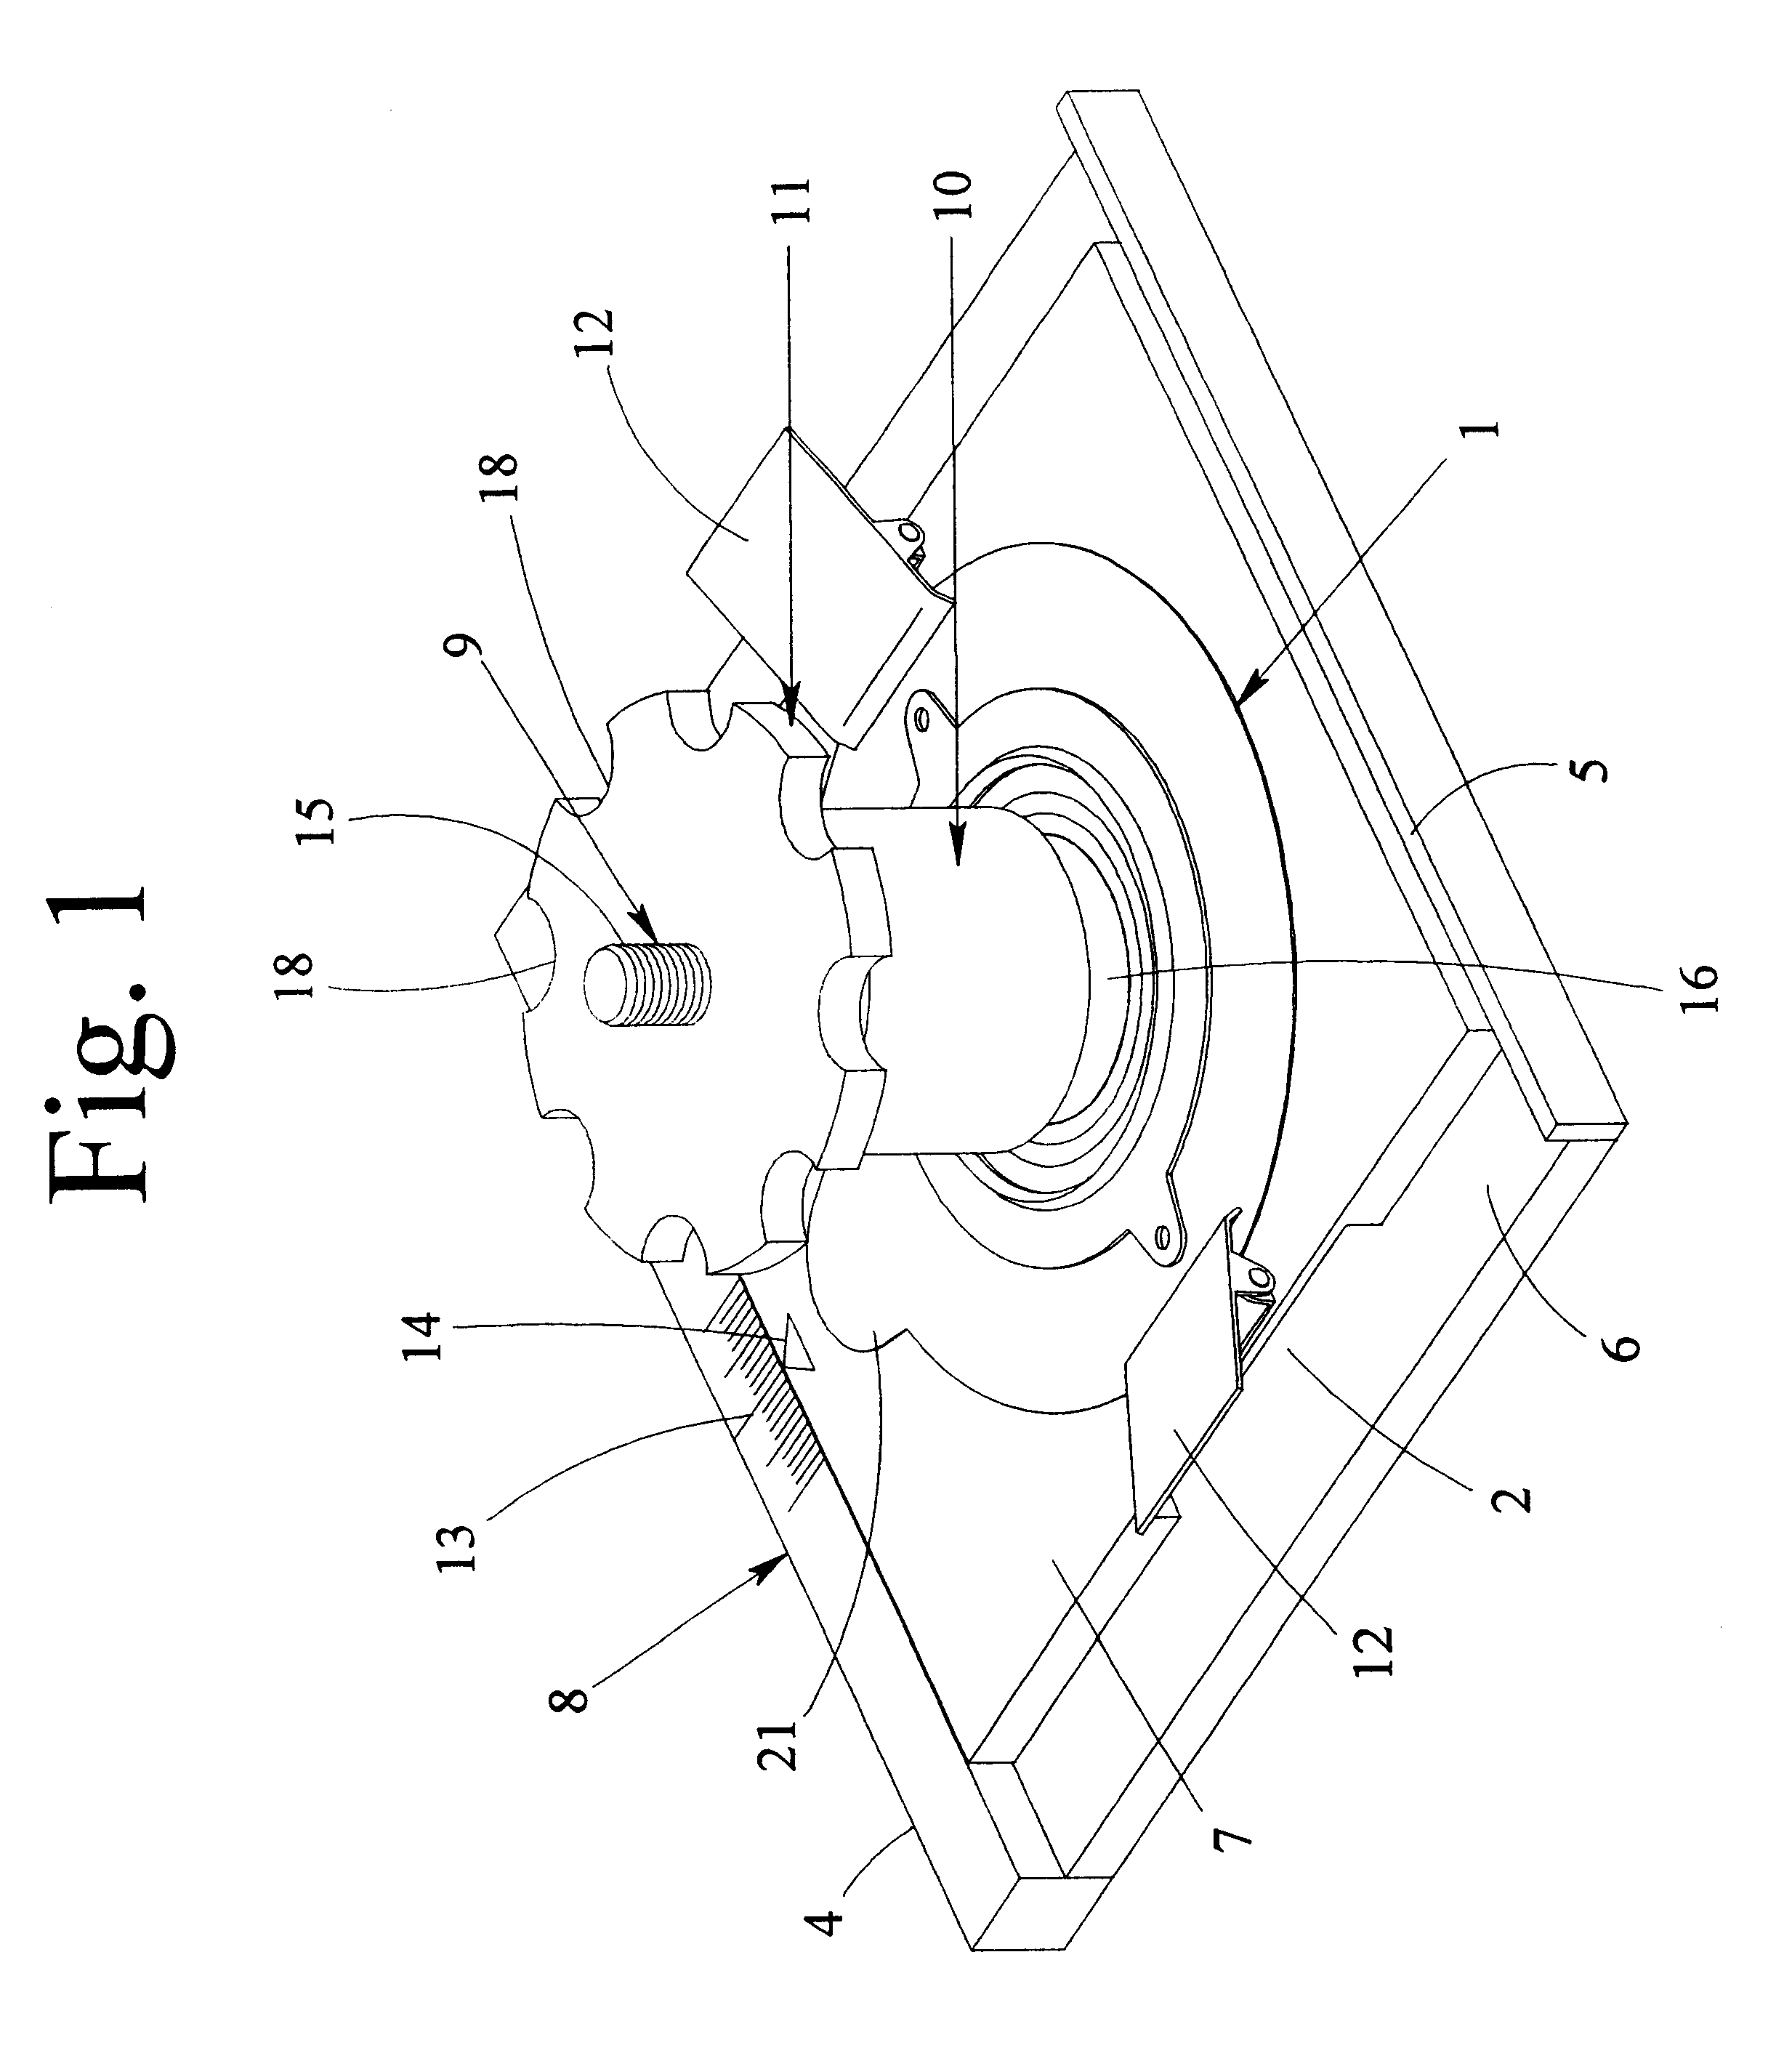 Apparatus for boring stoma wafers